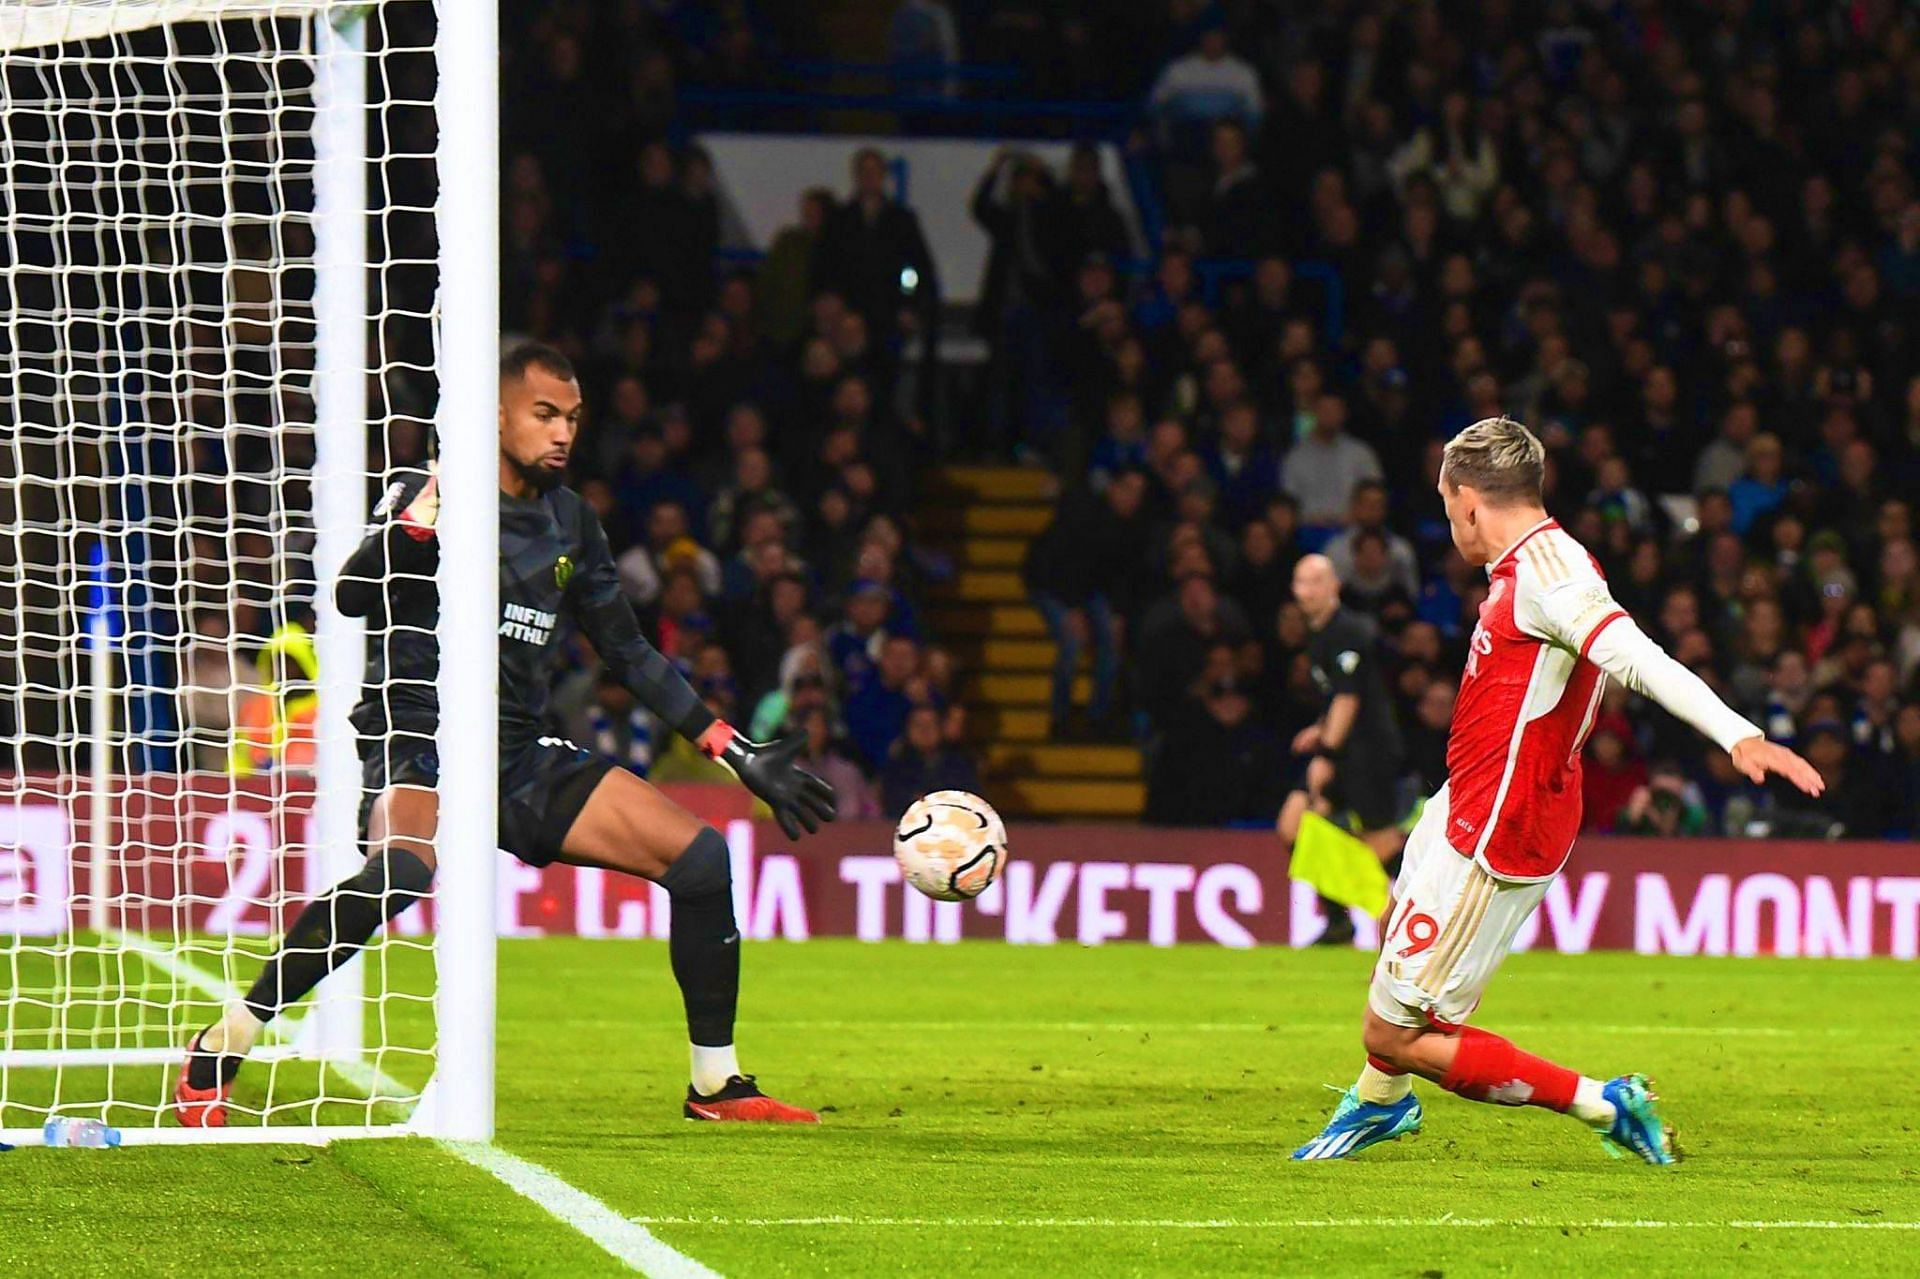 Chelsea squandered a two-goal lead to draw with Arsenal in the Premier League